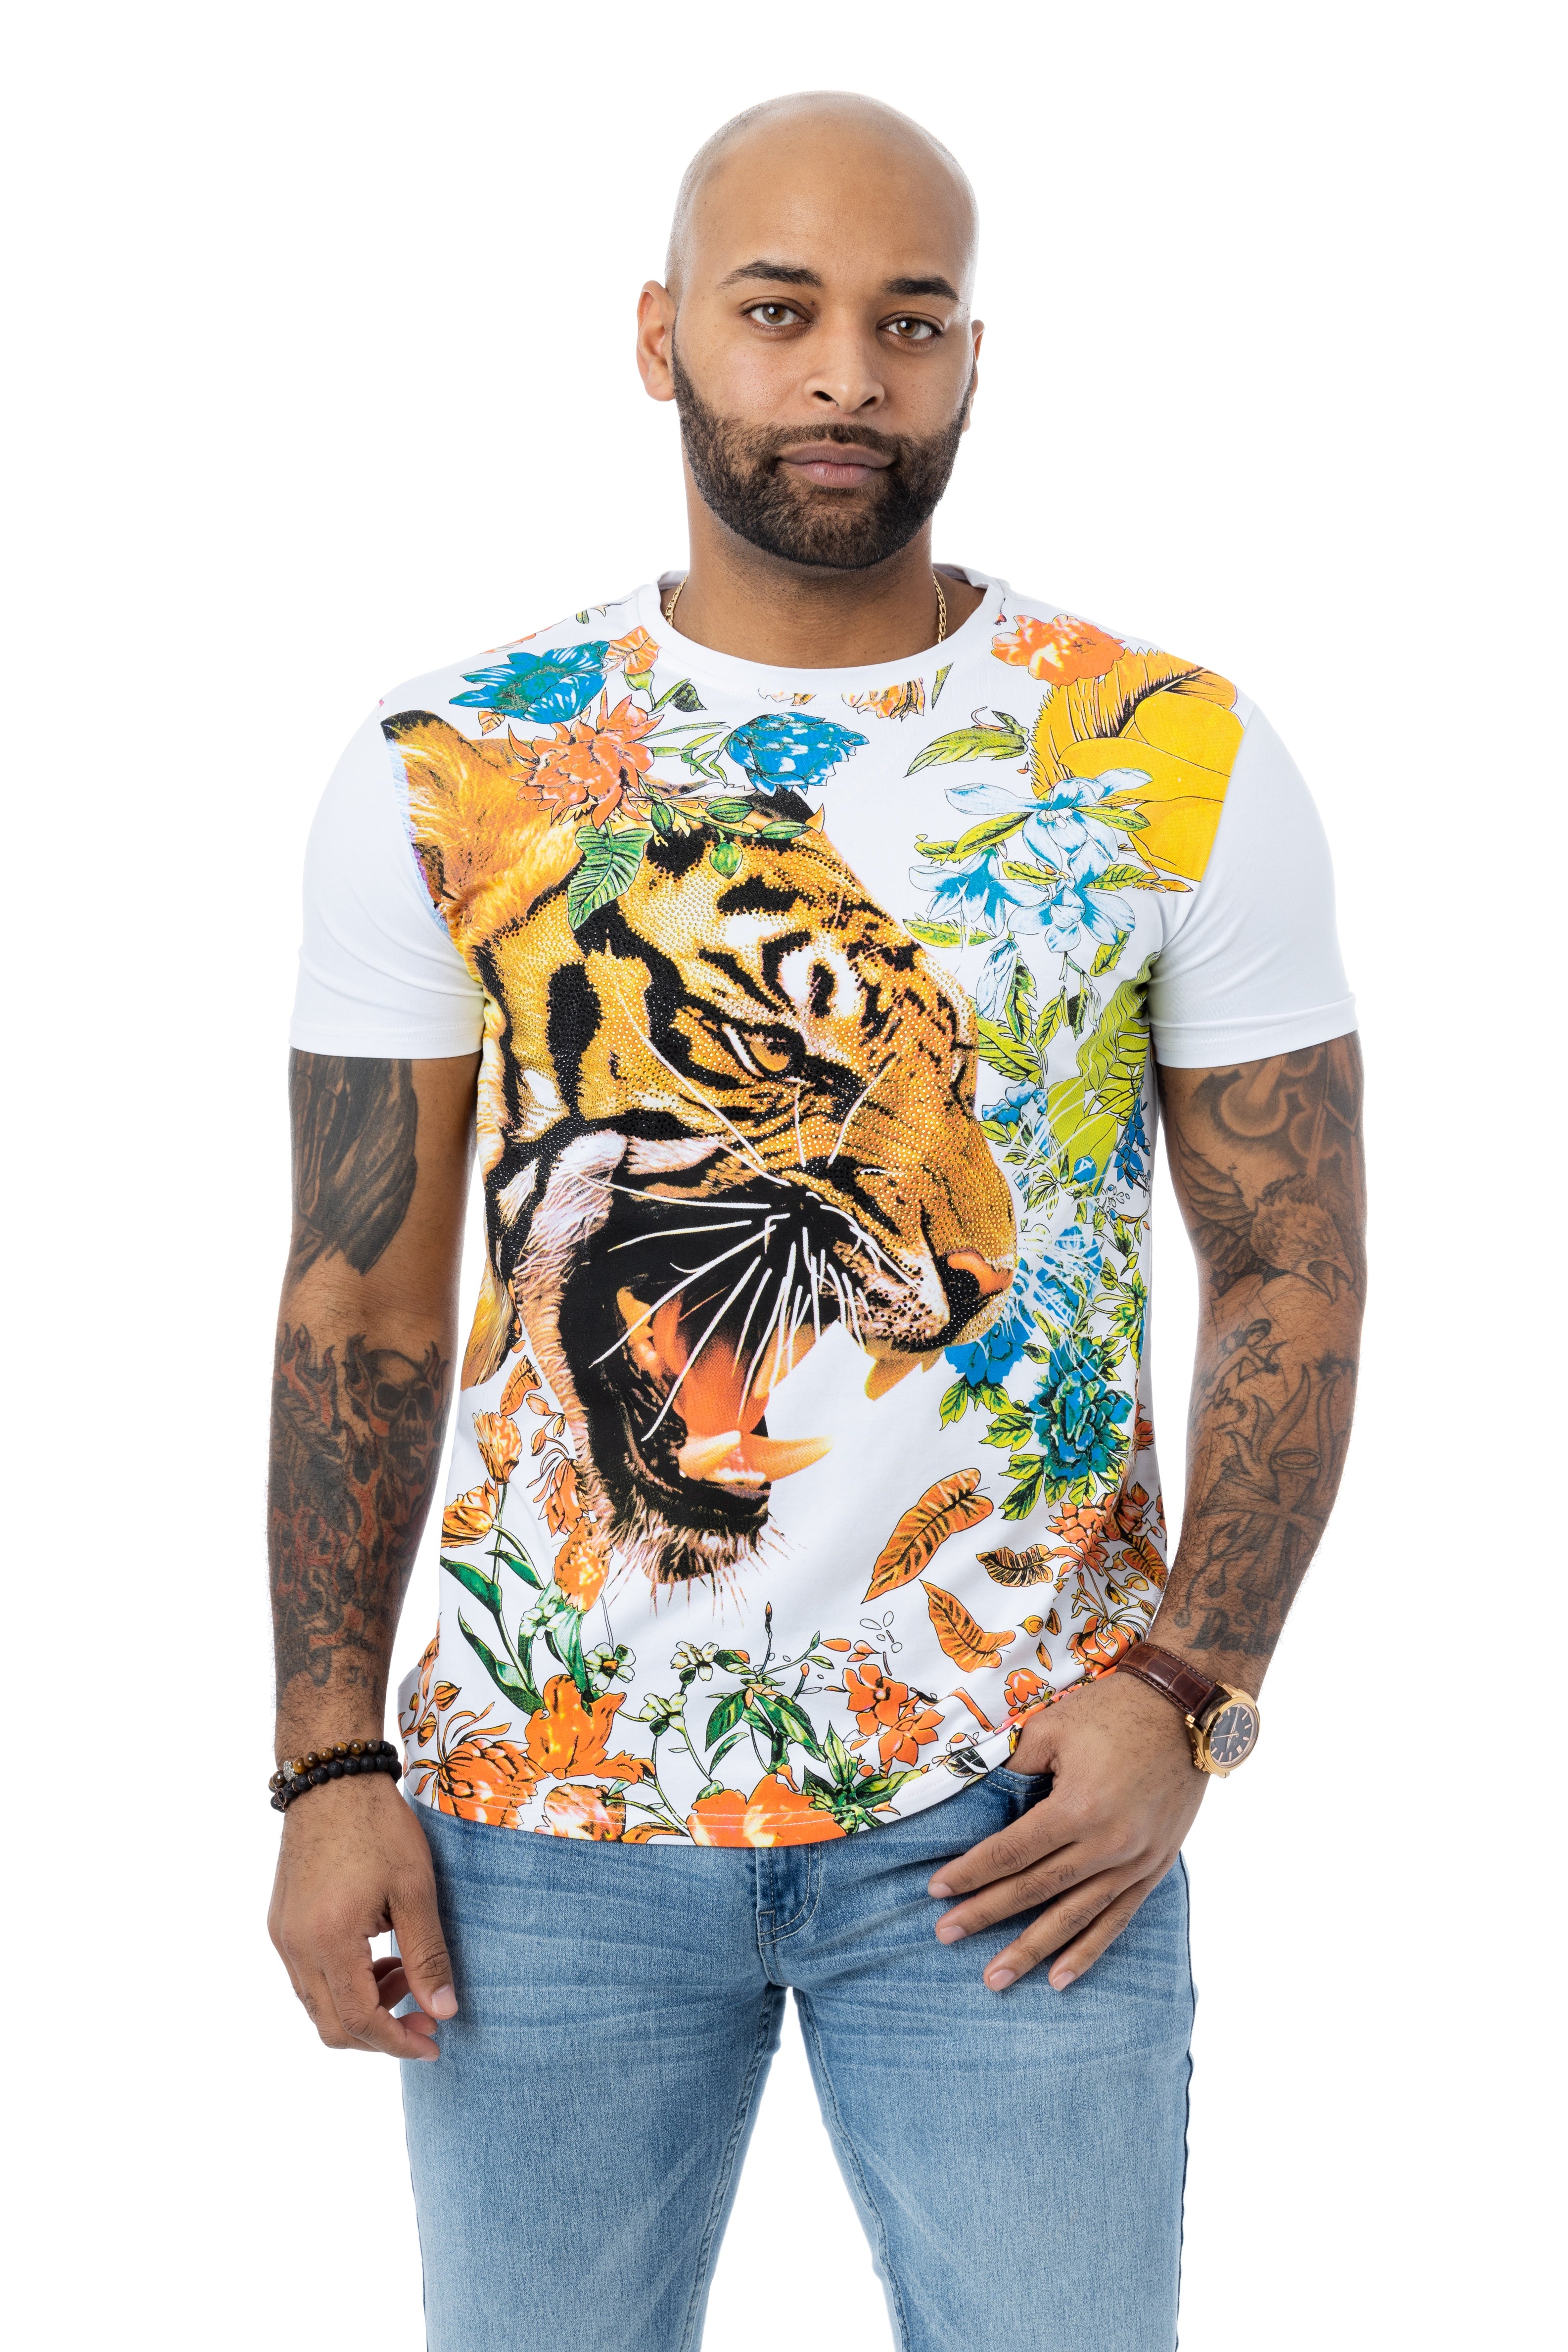 HEADS OR TAILS Men's Floral Tiger Rhinestone Graphic T-Shirt